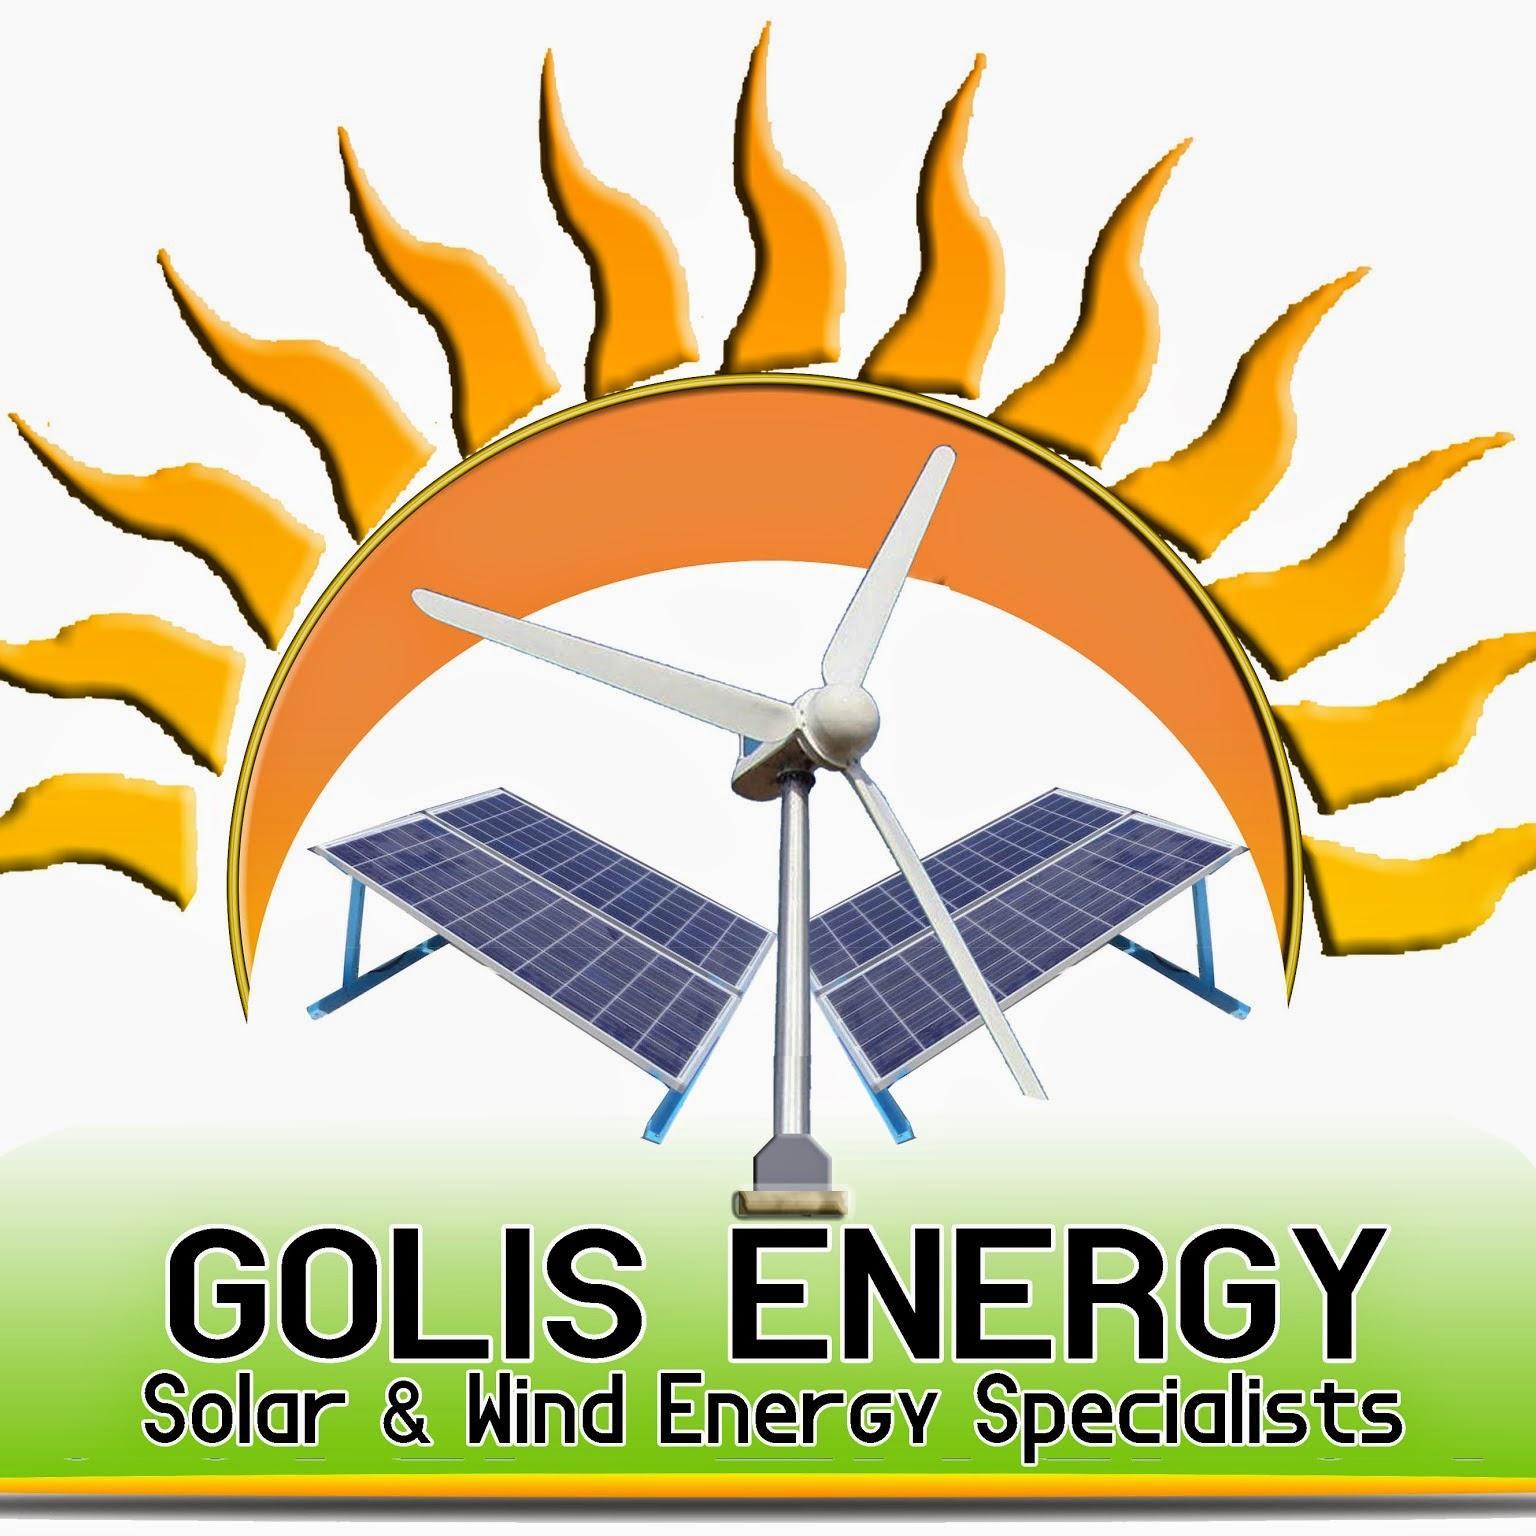 Access to renewable power supply, has never been easier, but Golis Energy become it's route to horn of Africa.